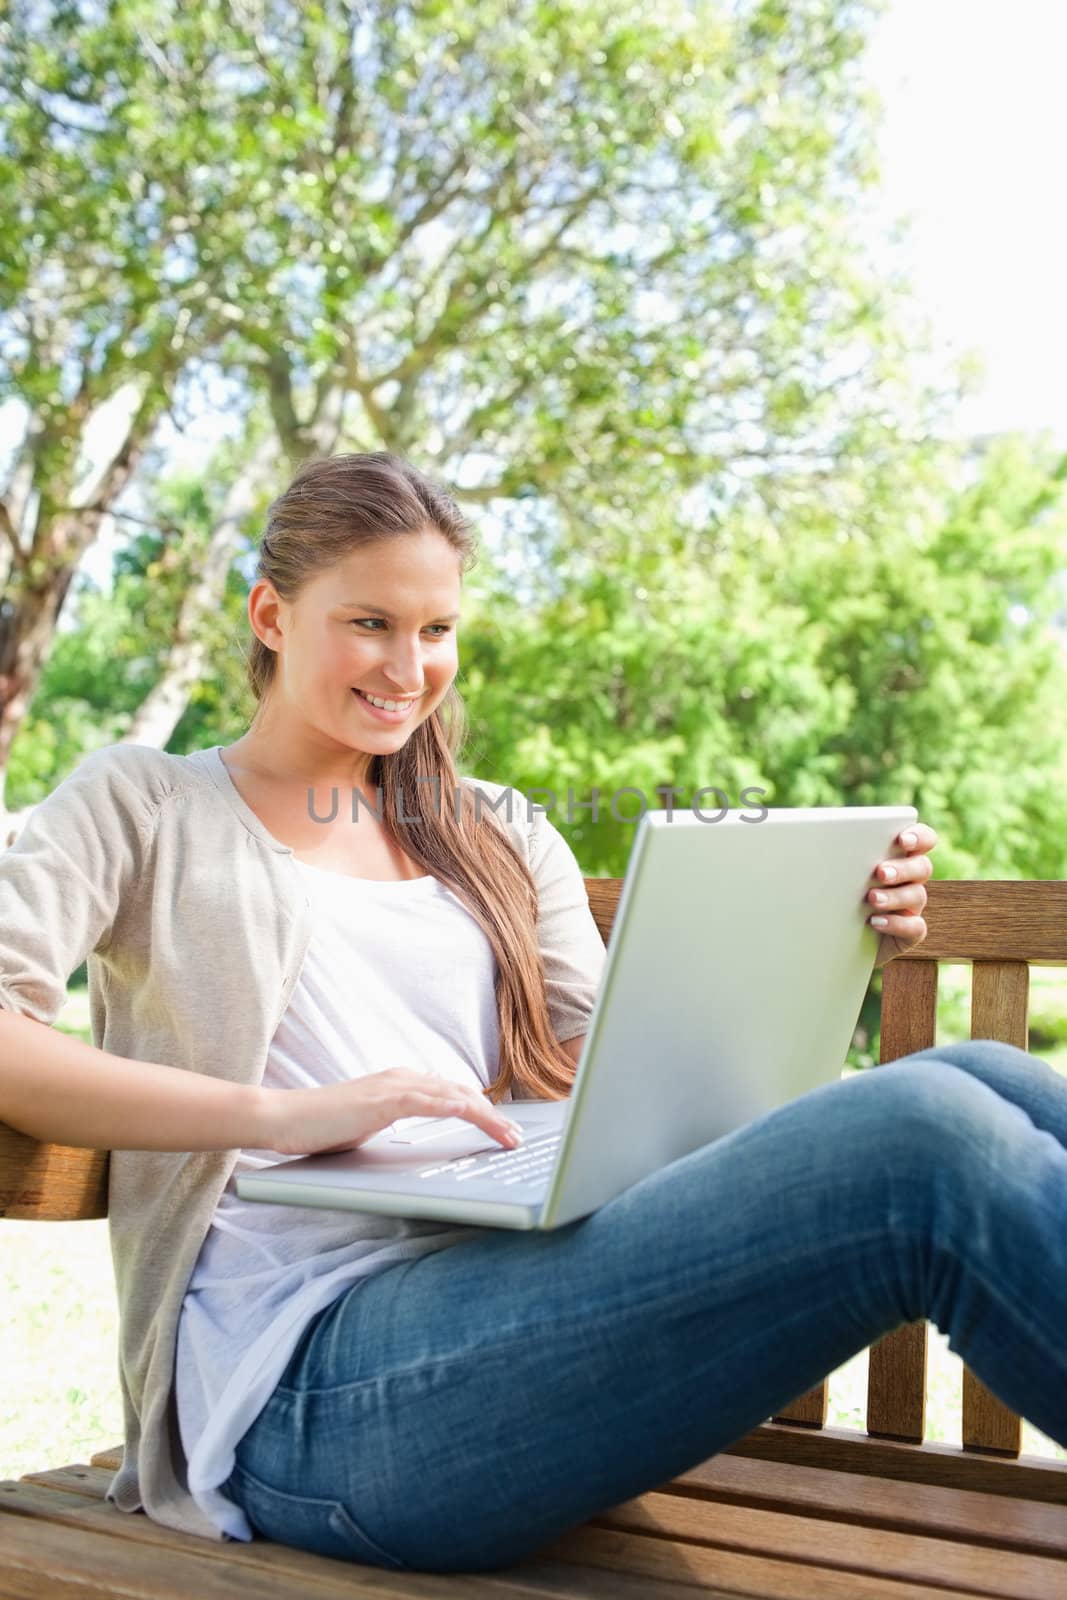 Smiling young woman with her laptop sitting on a bench